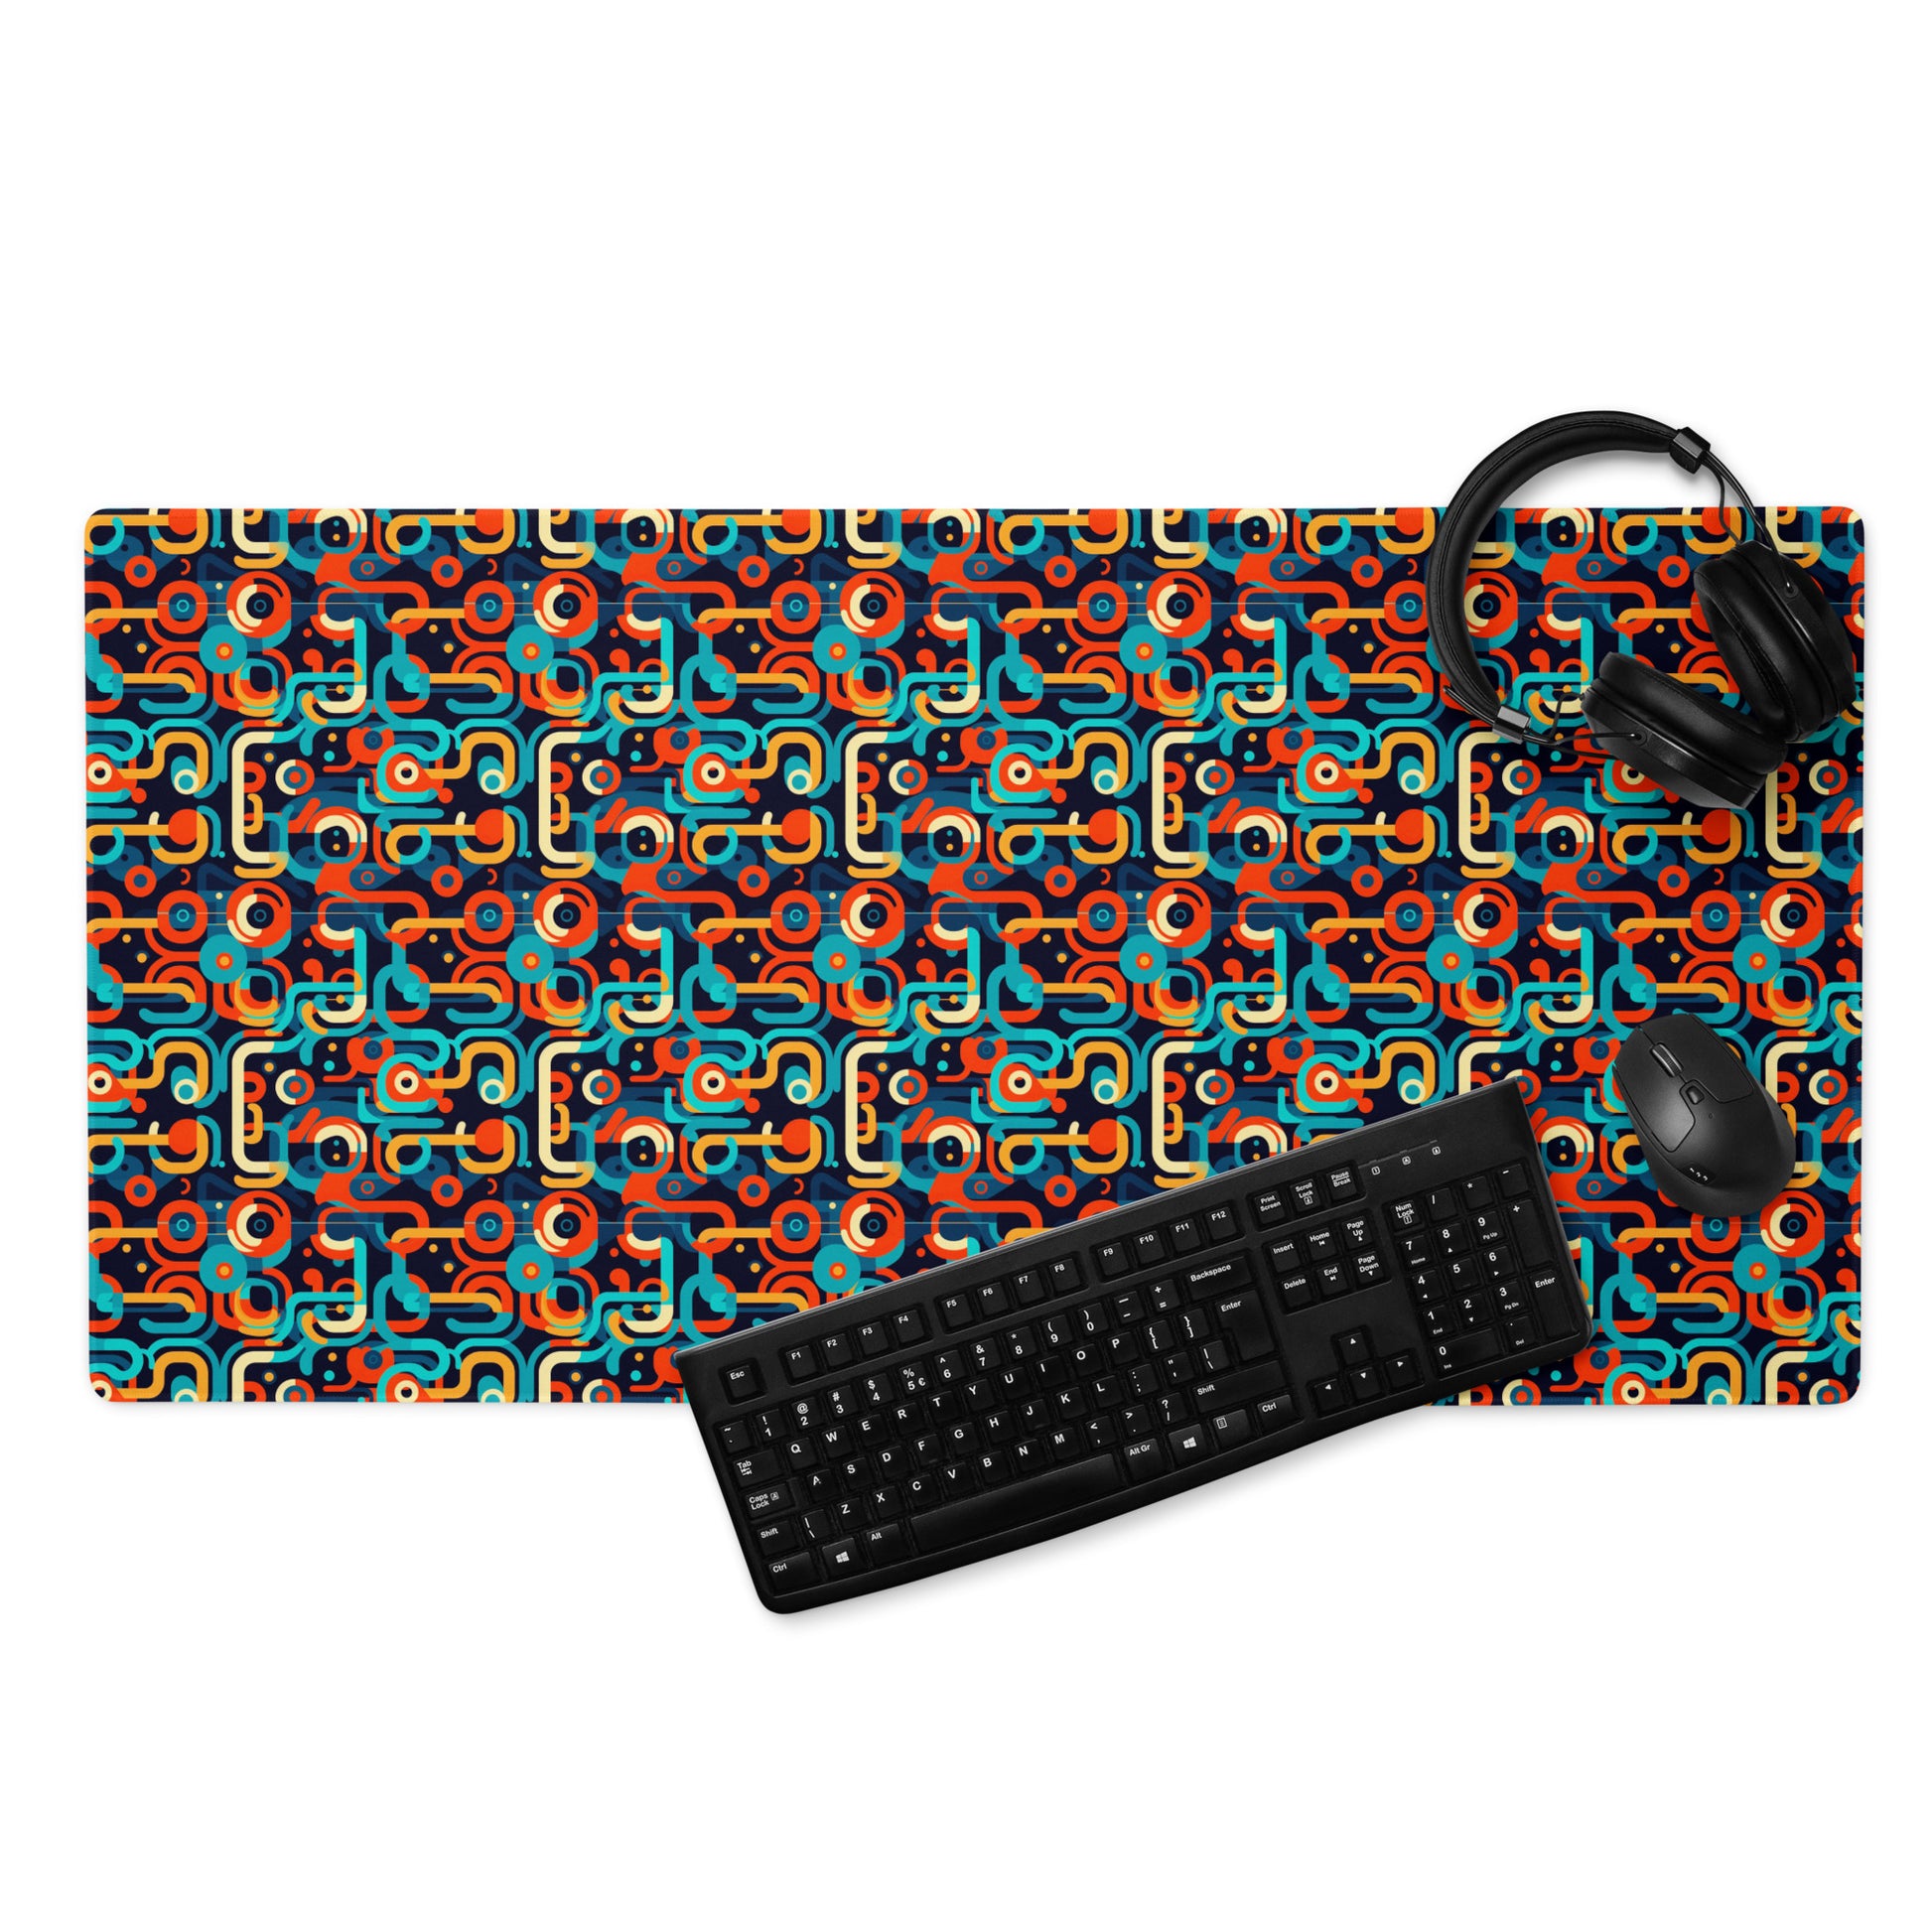 A 36" x 18" gaming desk pad with blue, orange, and beige lines on a black background. A keyboard, mouse, and headphones sit on it.